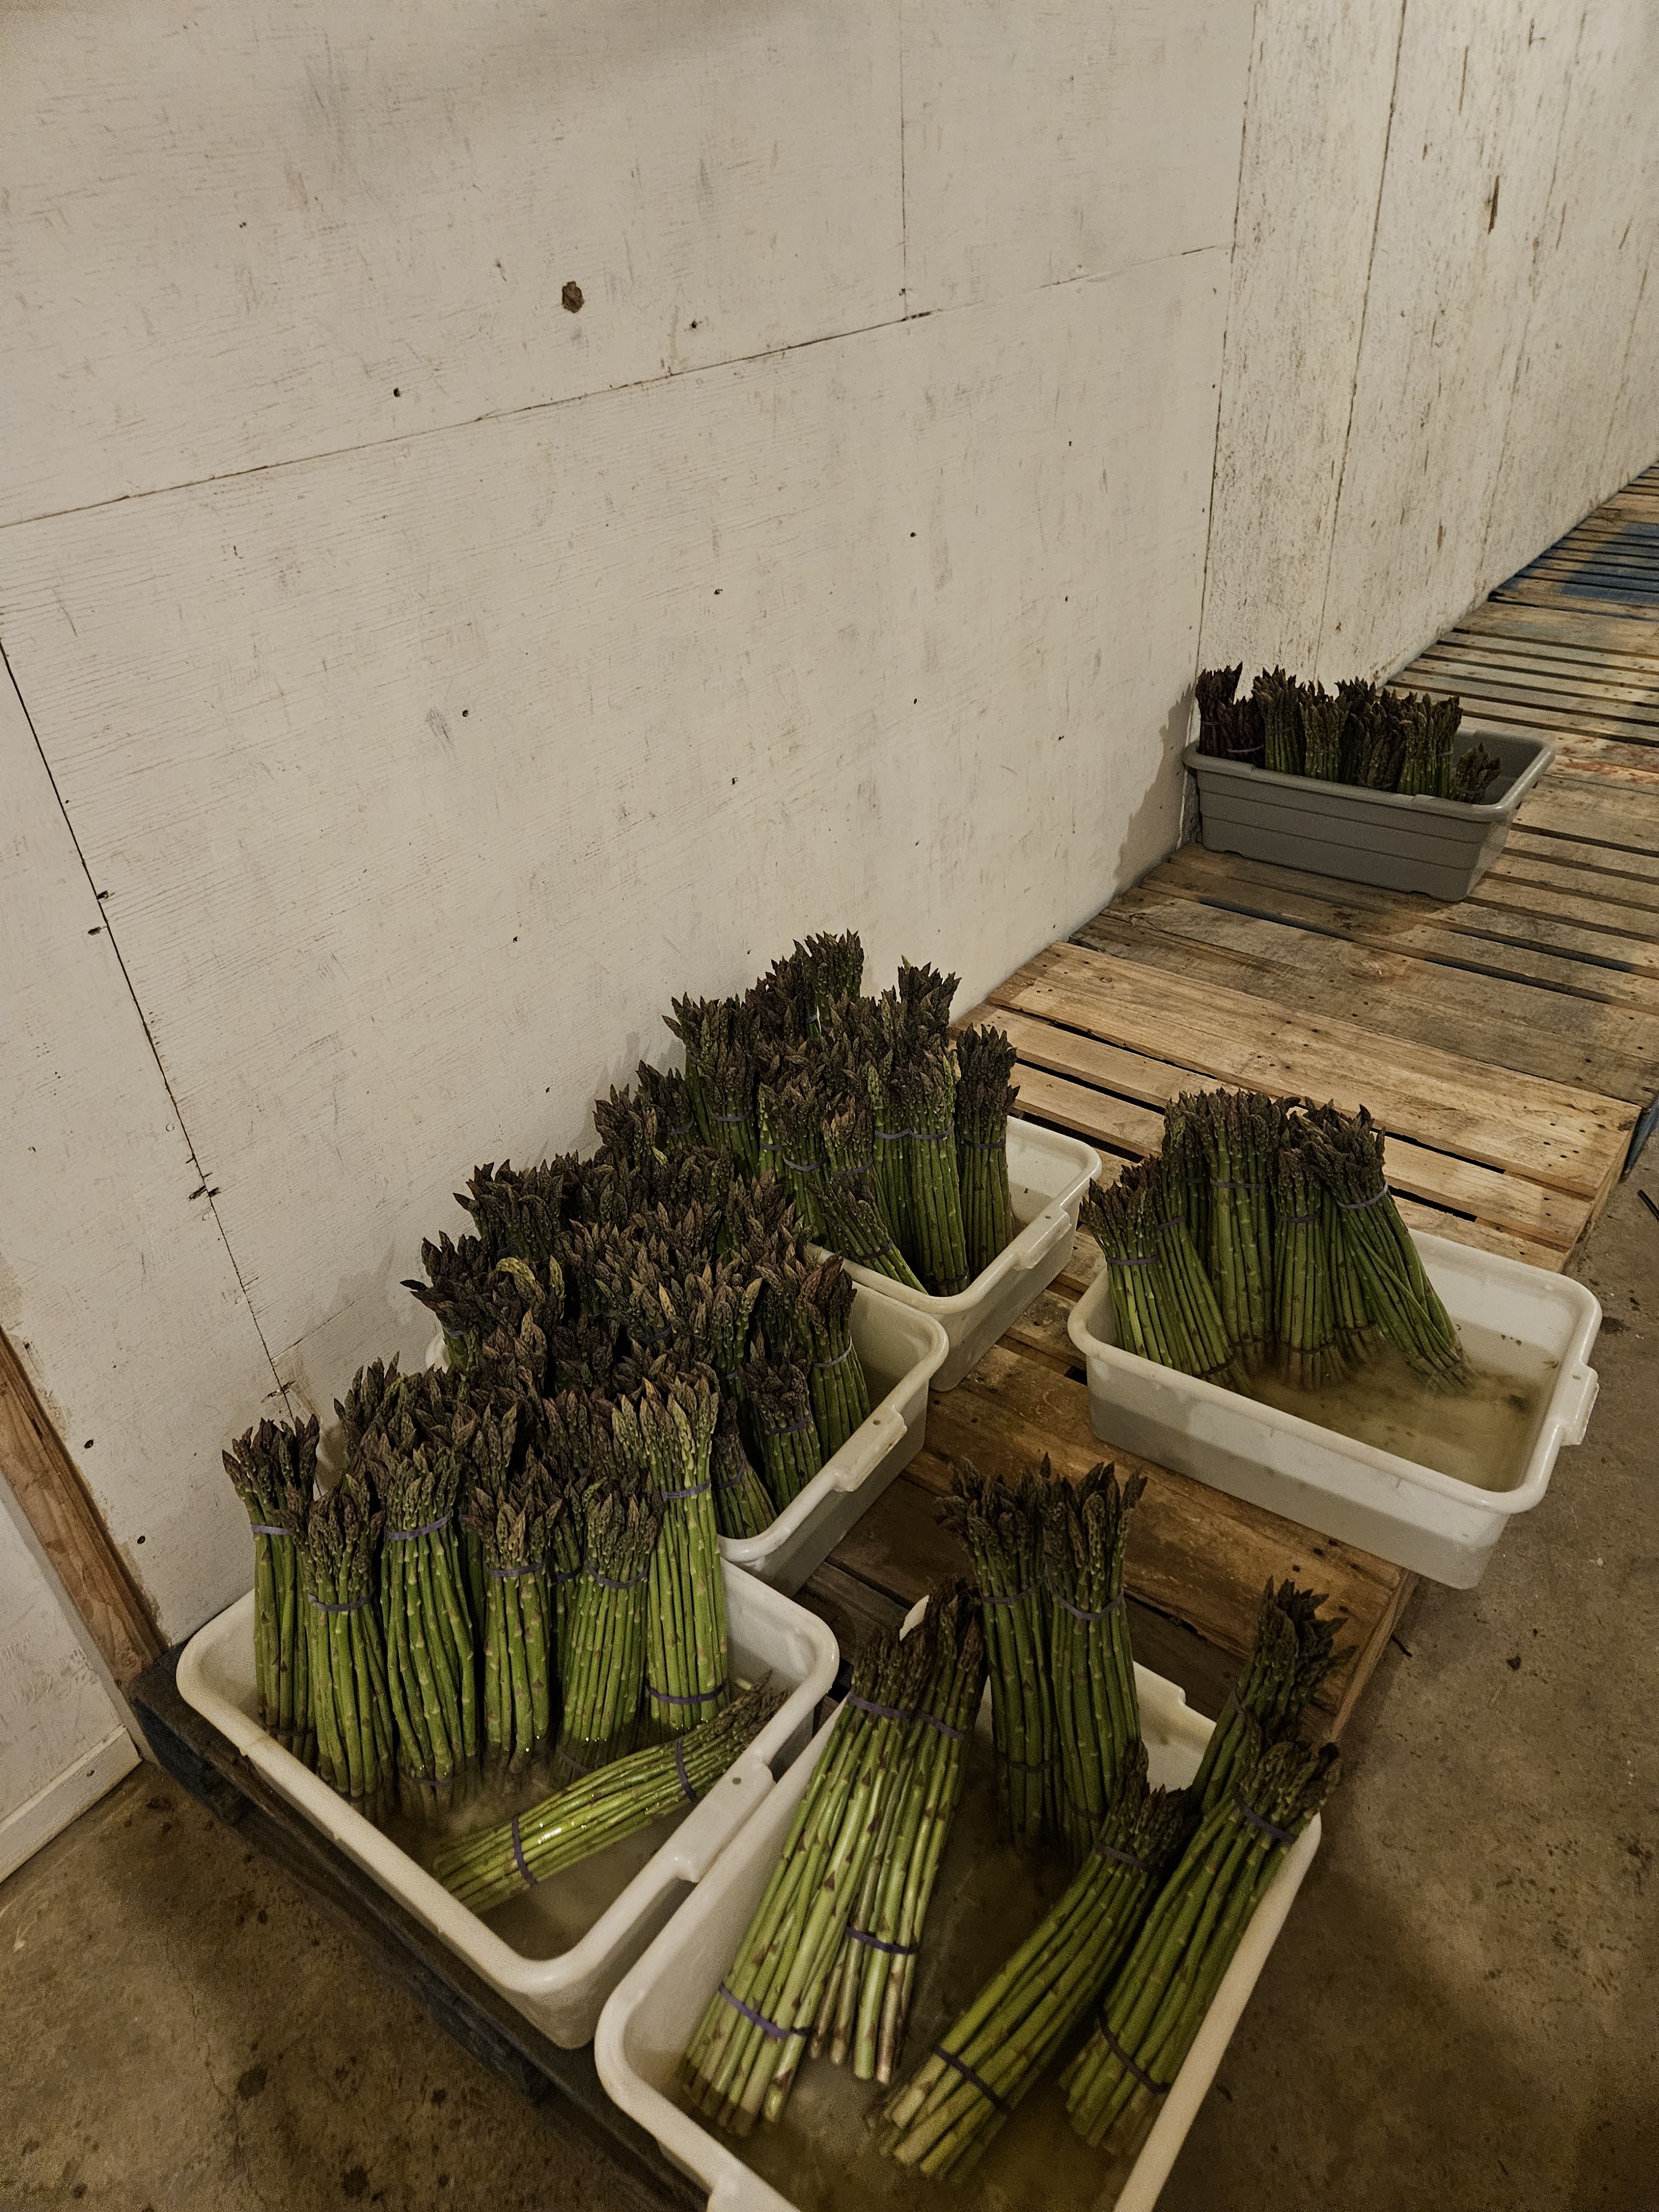 a bunches of asparagus in plastic containers